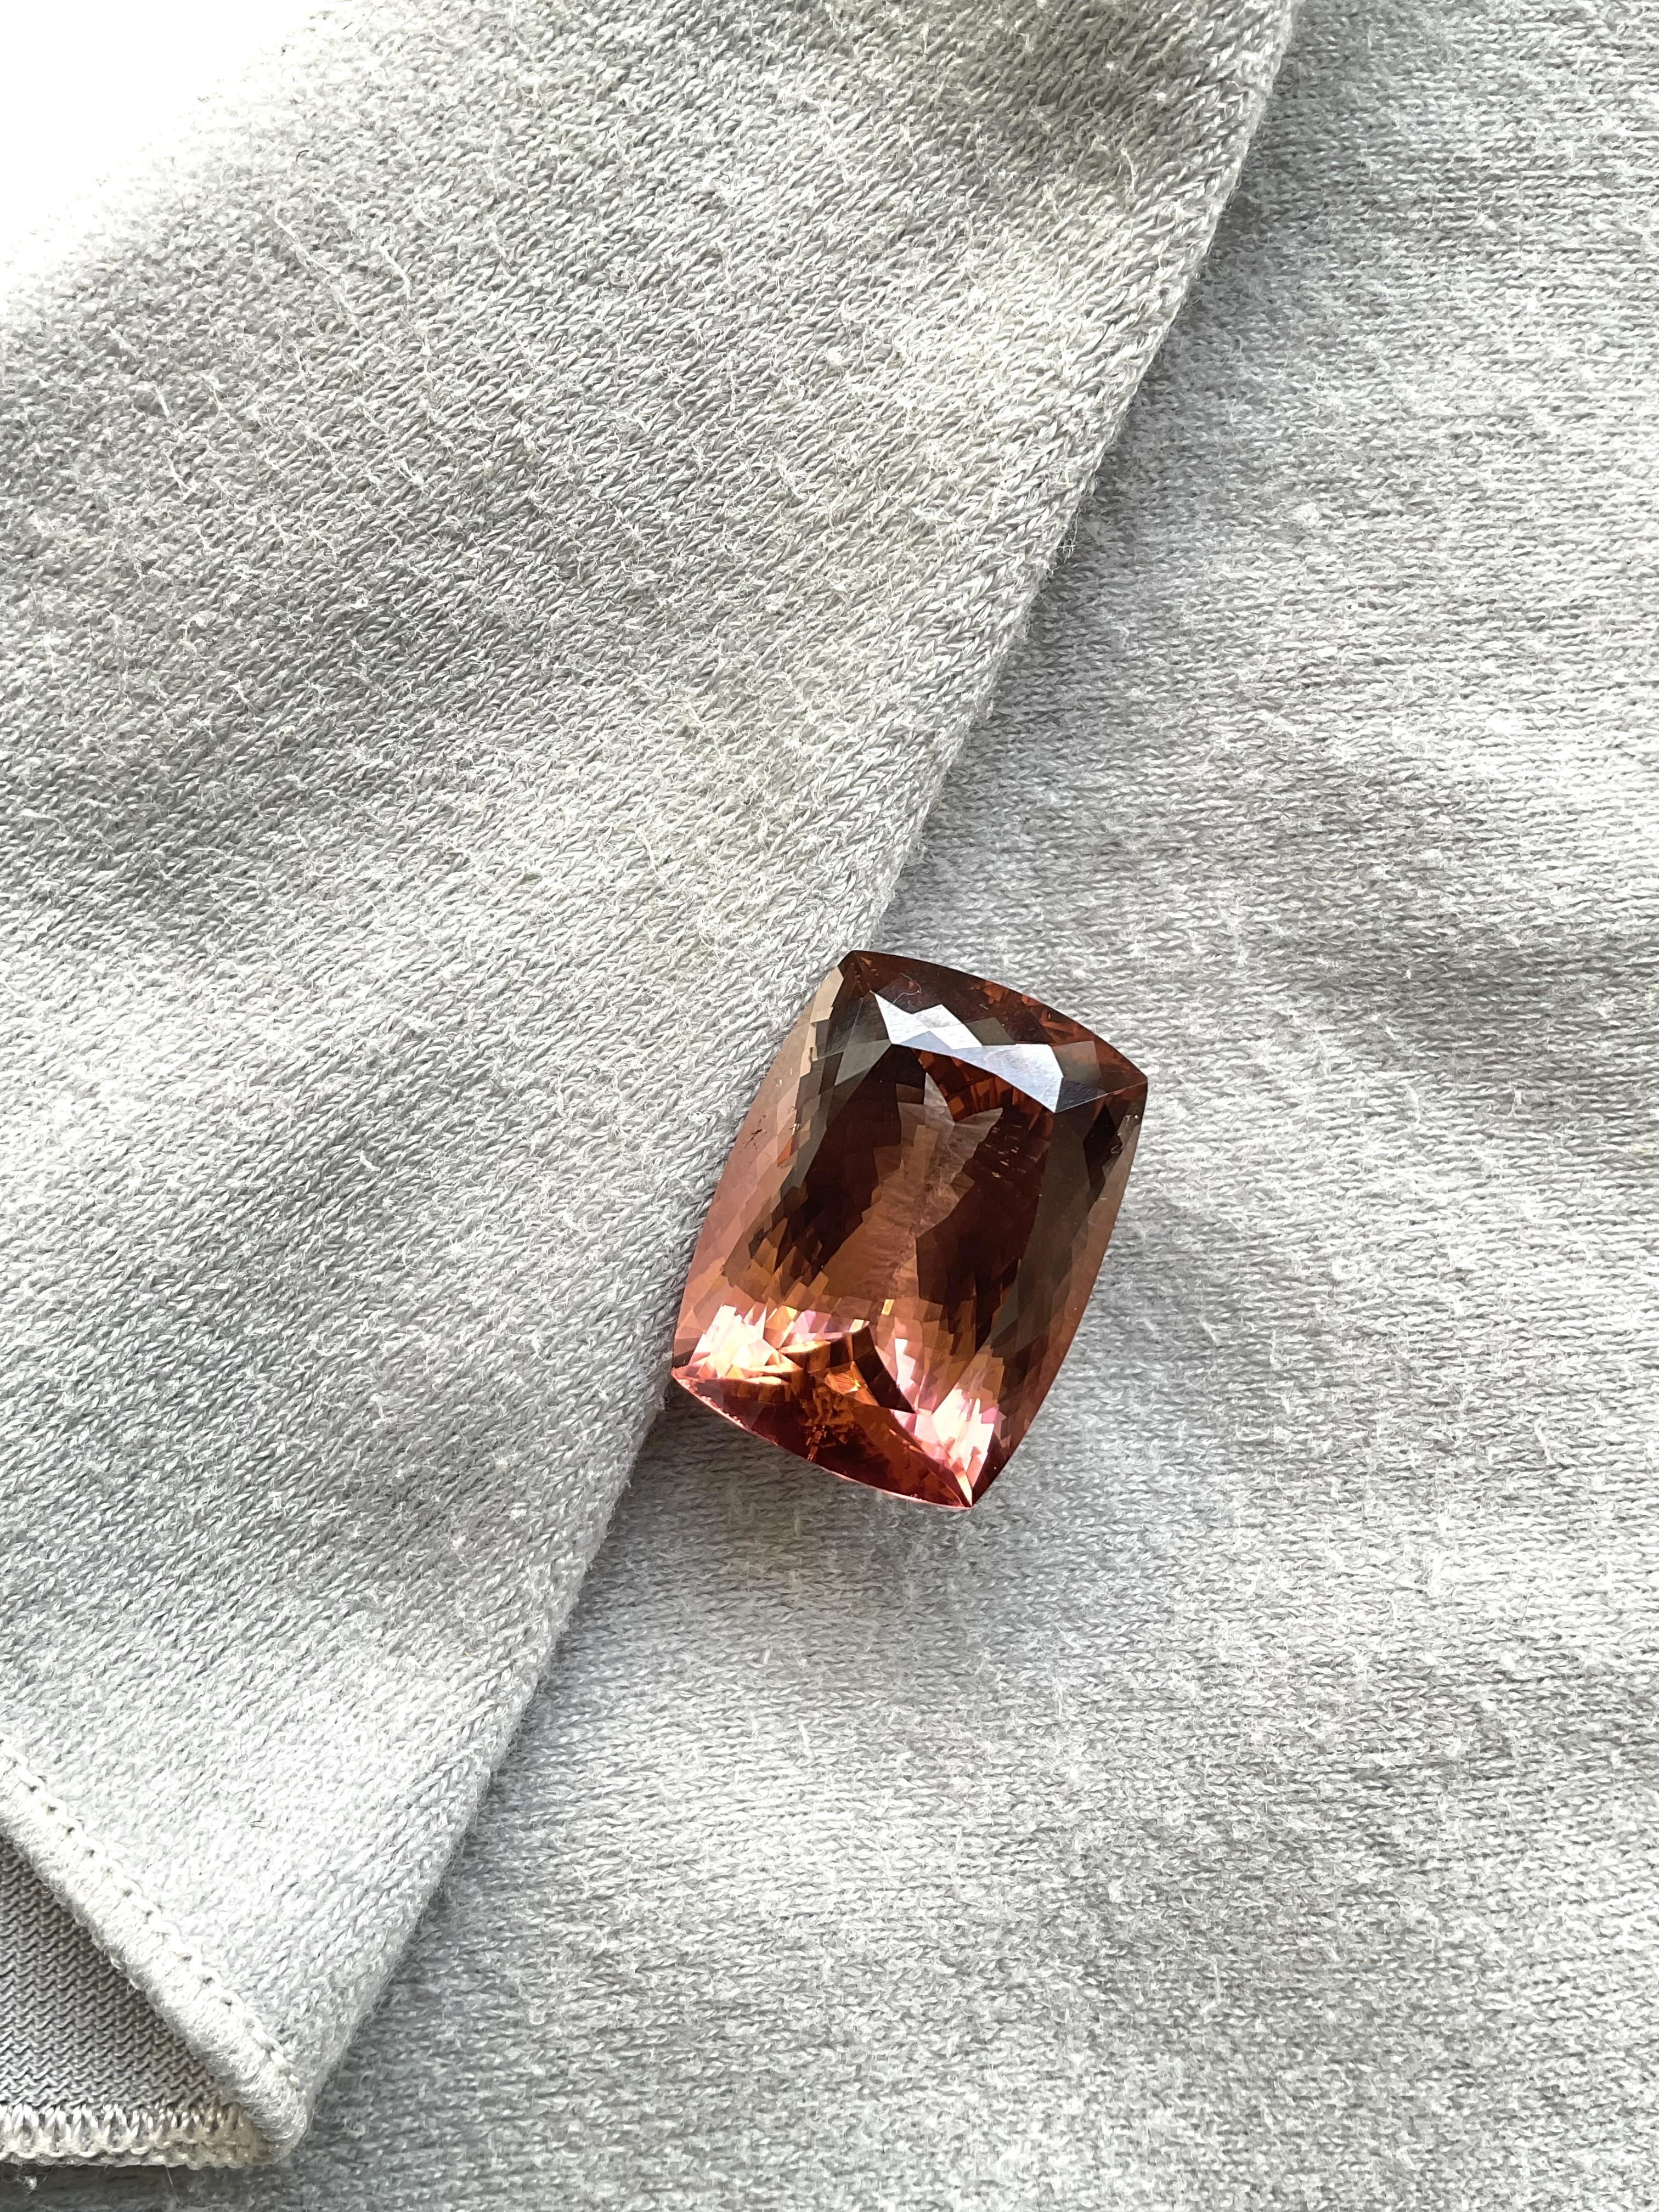 Art Deco 25.82 Carats Peach Pink Tourmaline Cushion Faceted Cut Stone Natural Gemstone For Sale